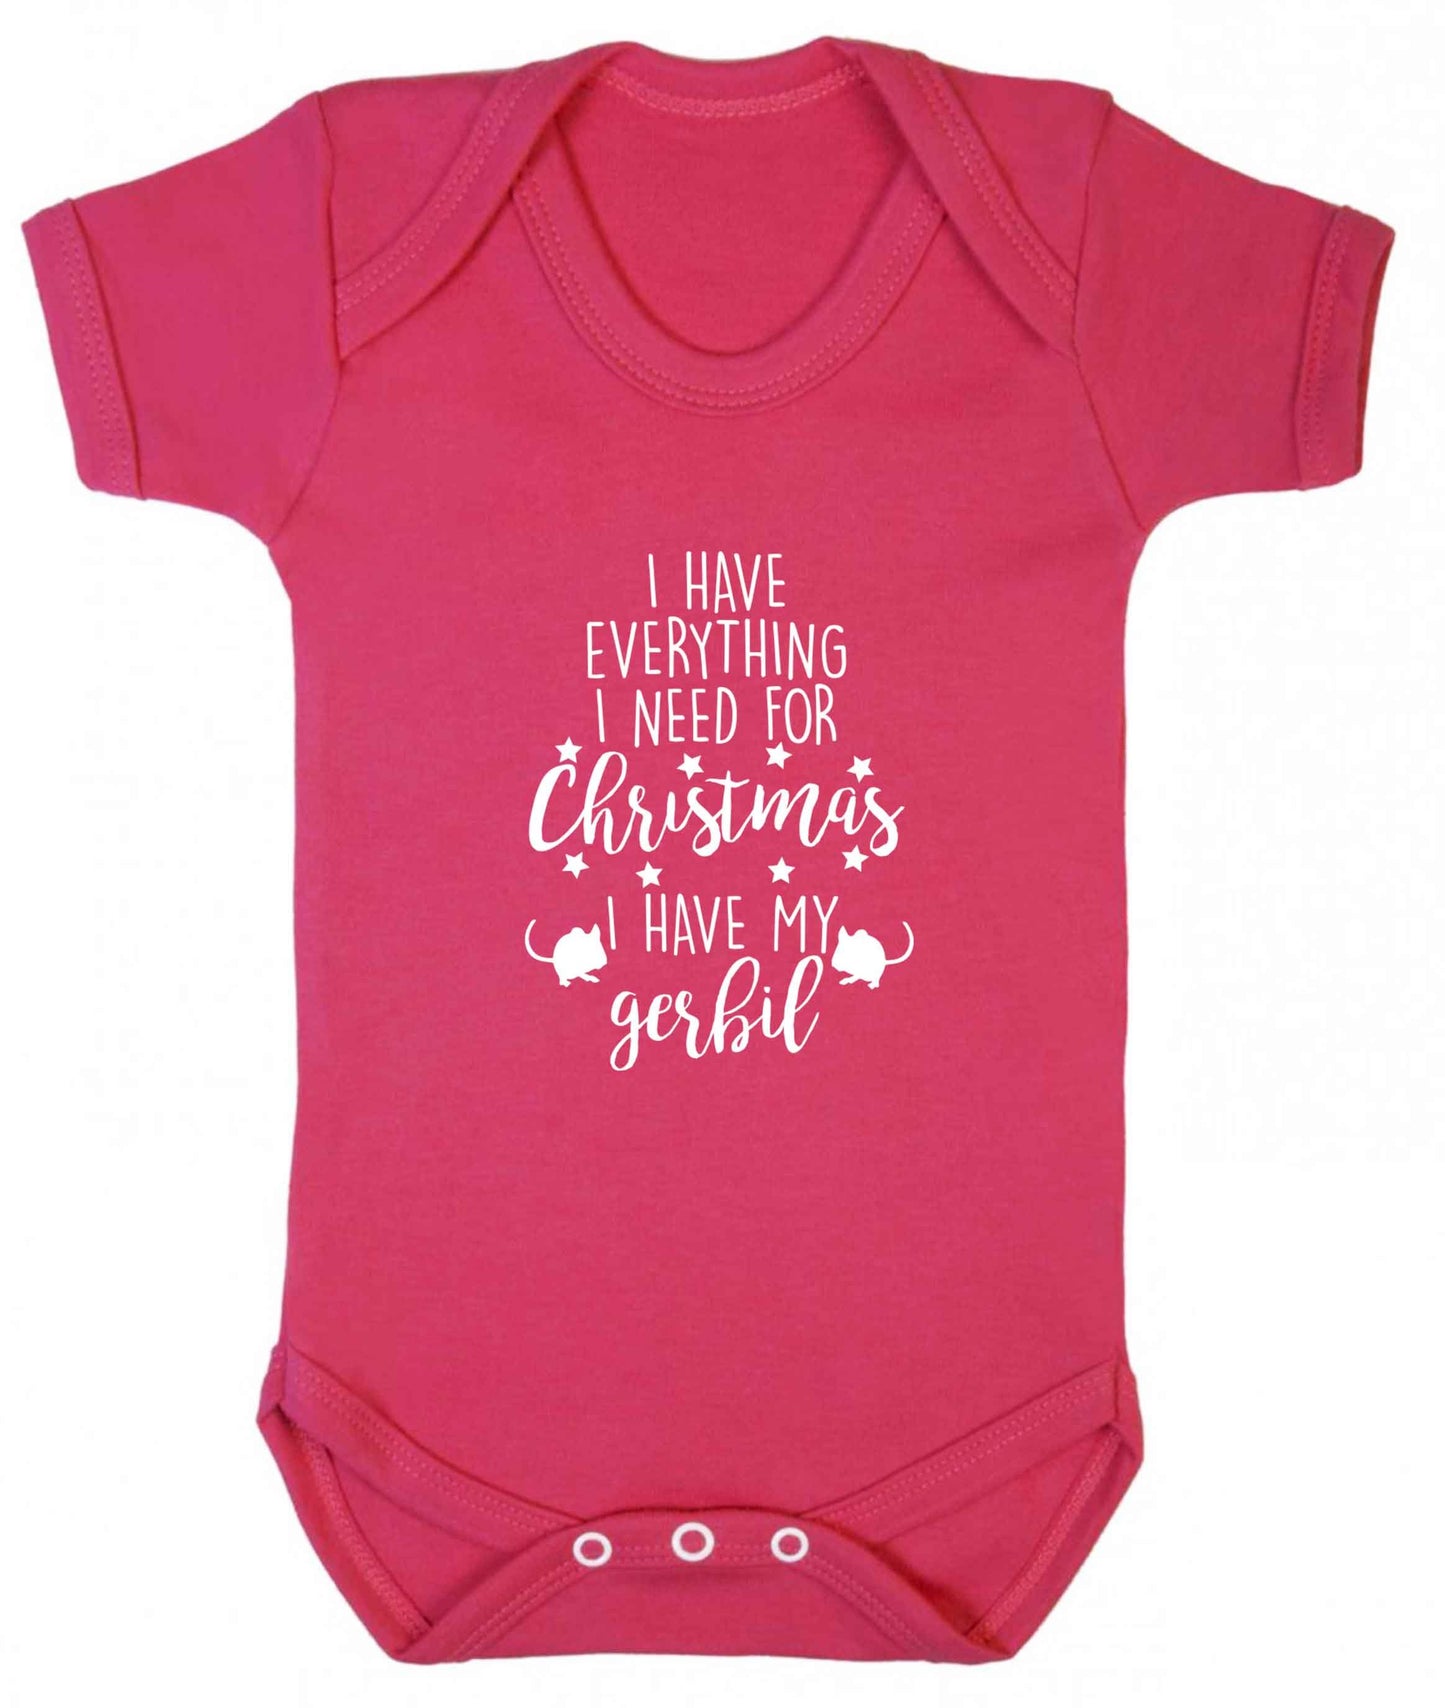 I have everything I need for Christmas I have my gerbil baby vest dark pink 18-24 months